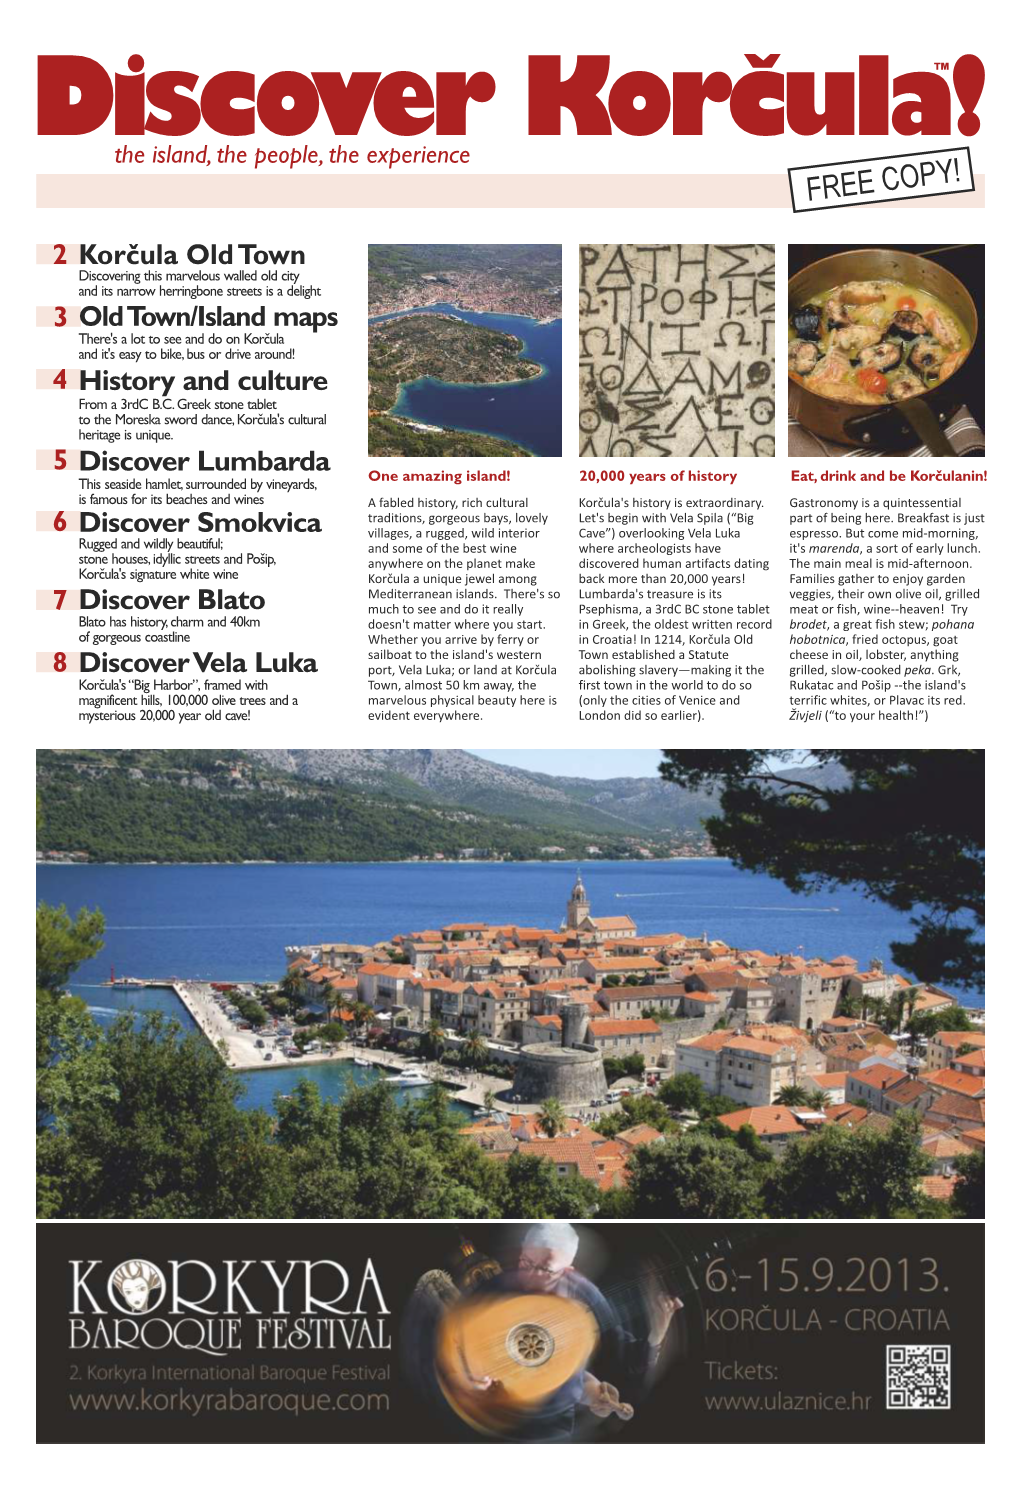 The Island, the People, the Experience Discover Korčula! FREE COPY!